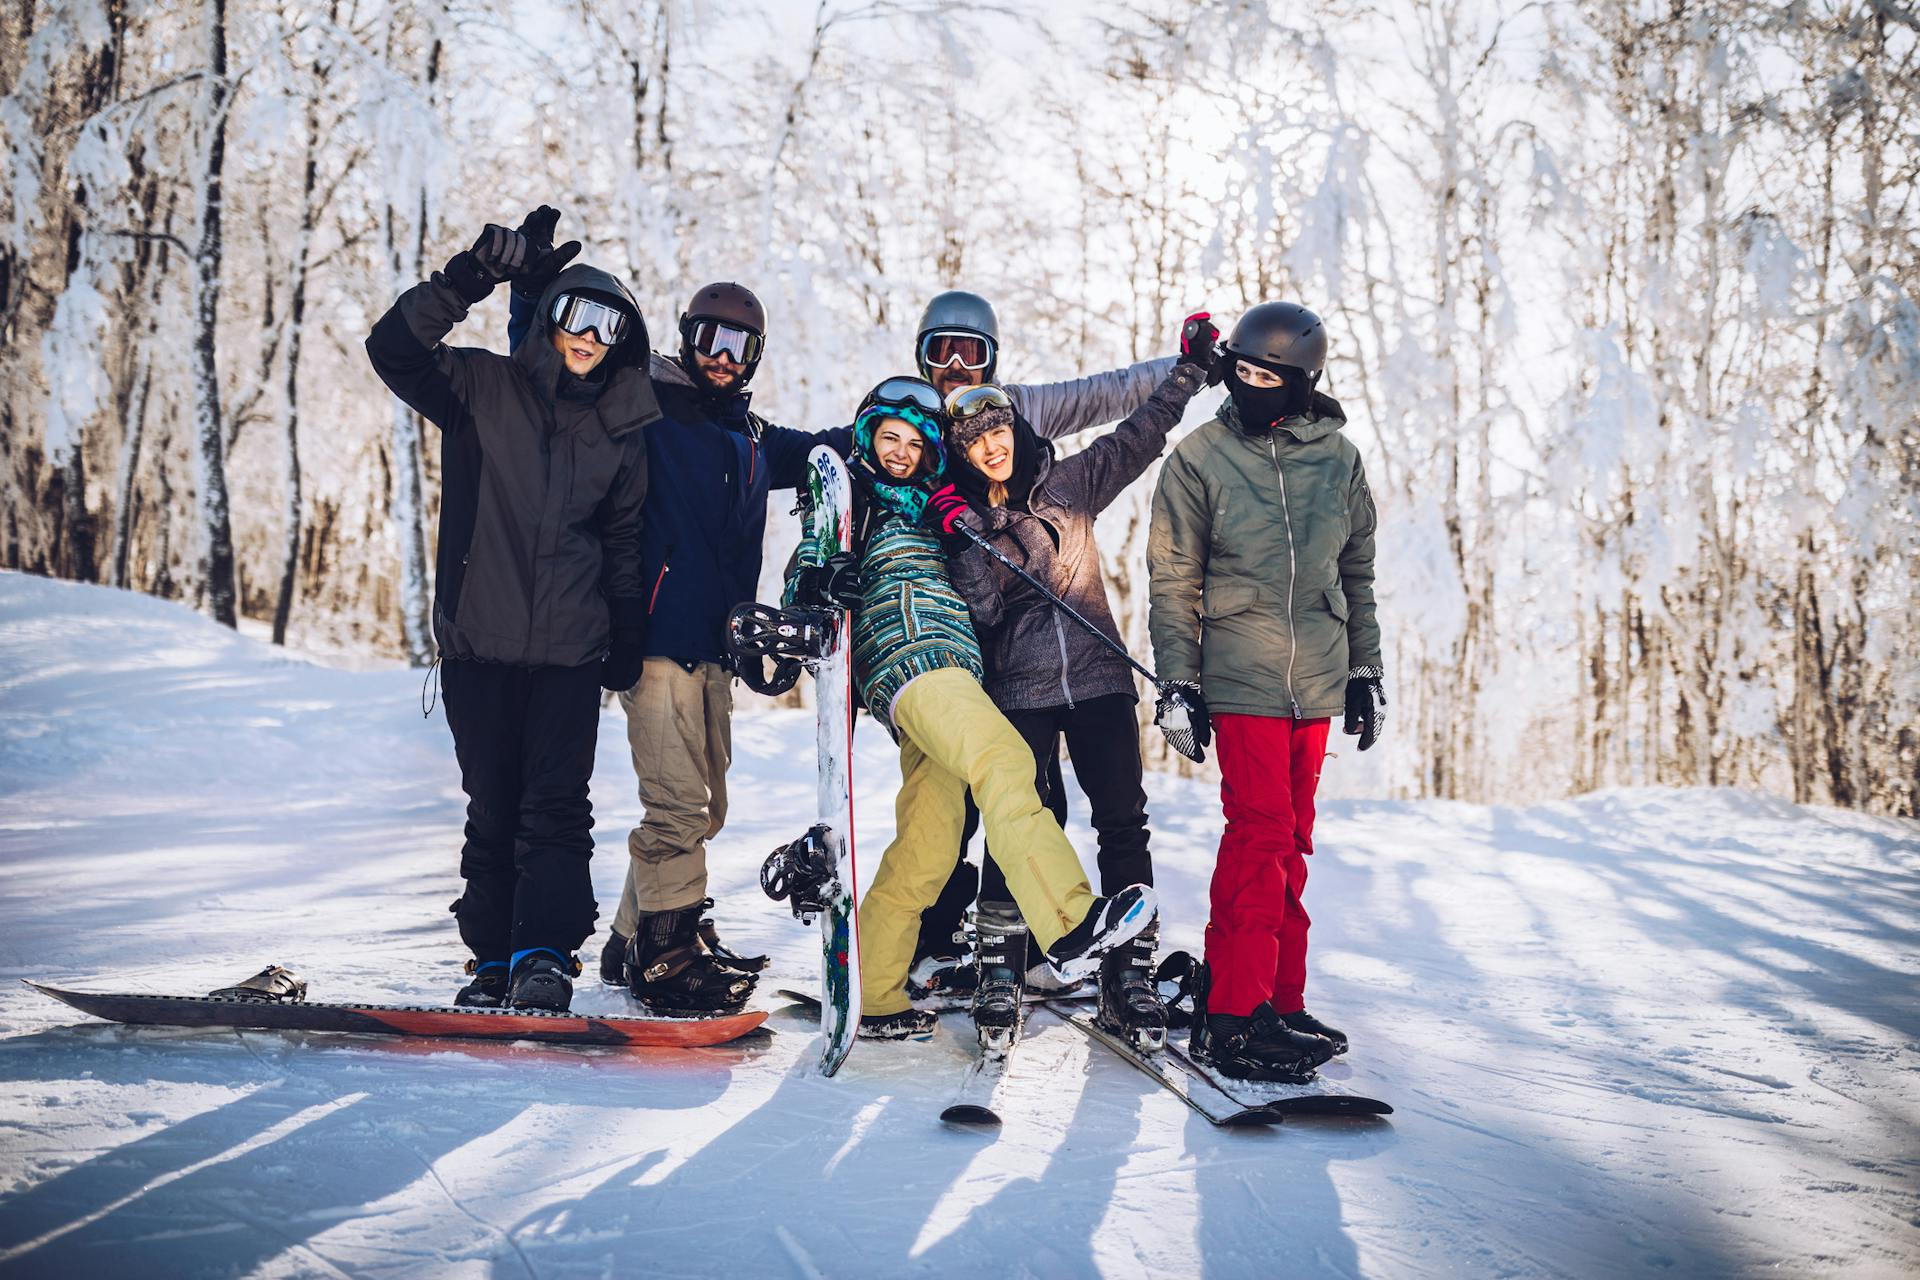 Group of friends skiers and snowboarders posing for photo